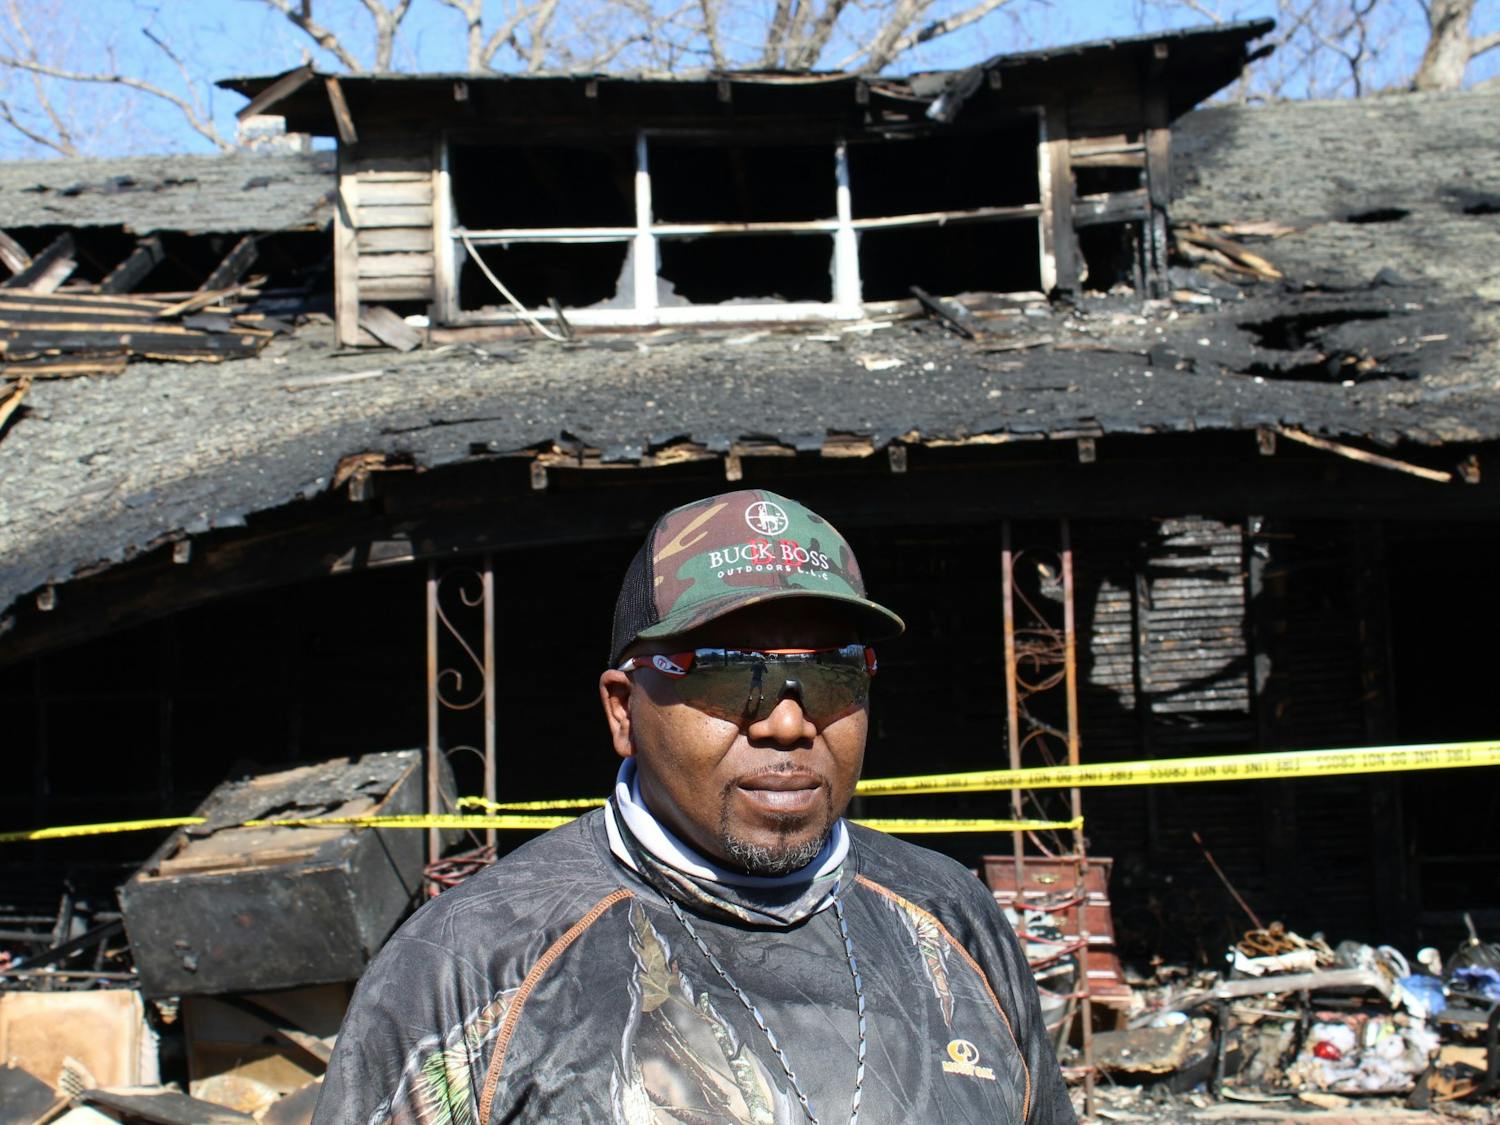 Zim Torain, an employee for the Hillsborough Utilities Department, lost his home in a house fire in February. The town is now rallying in support of him and his family, working to provide much needed items that were lost in the fire.